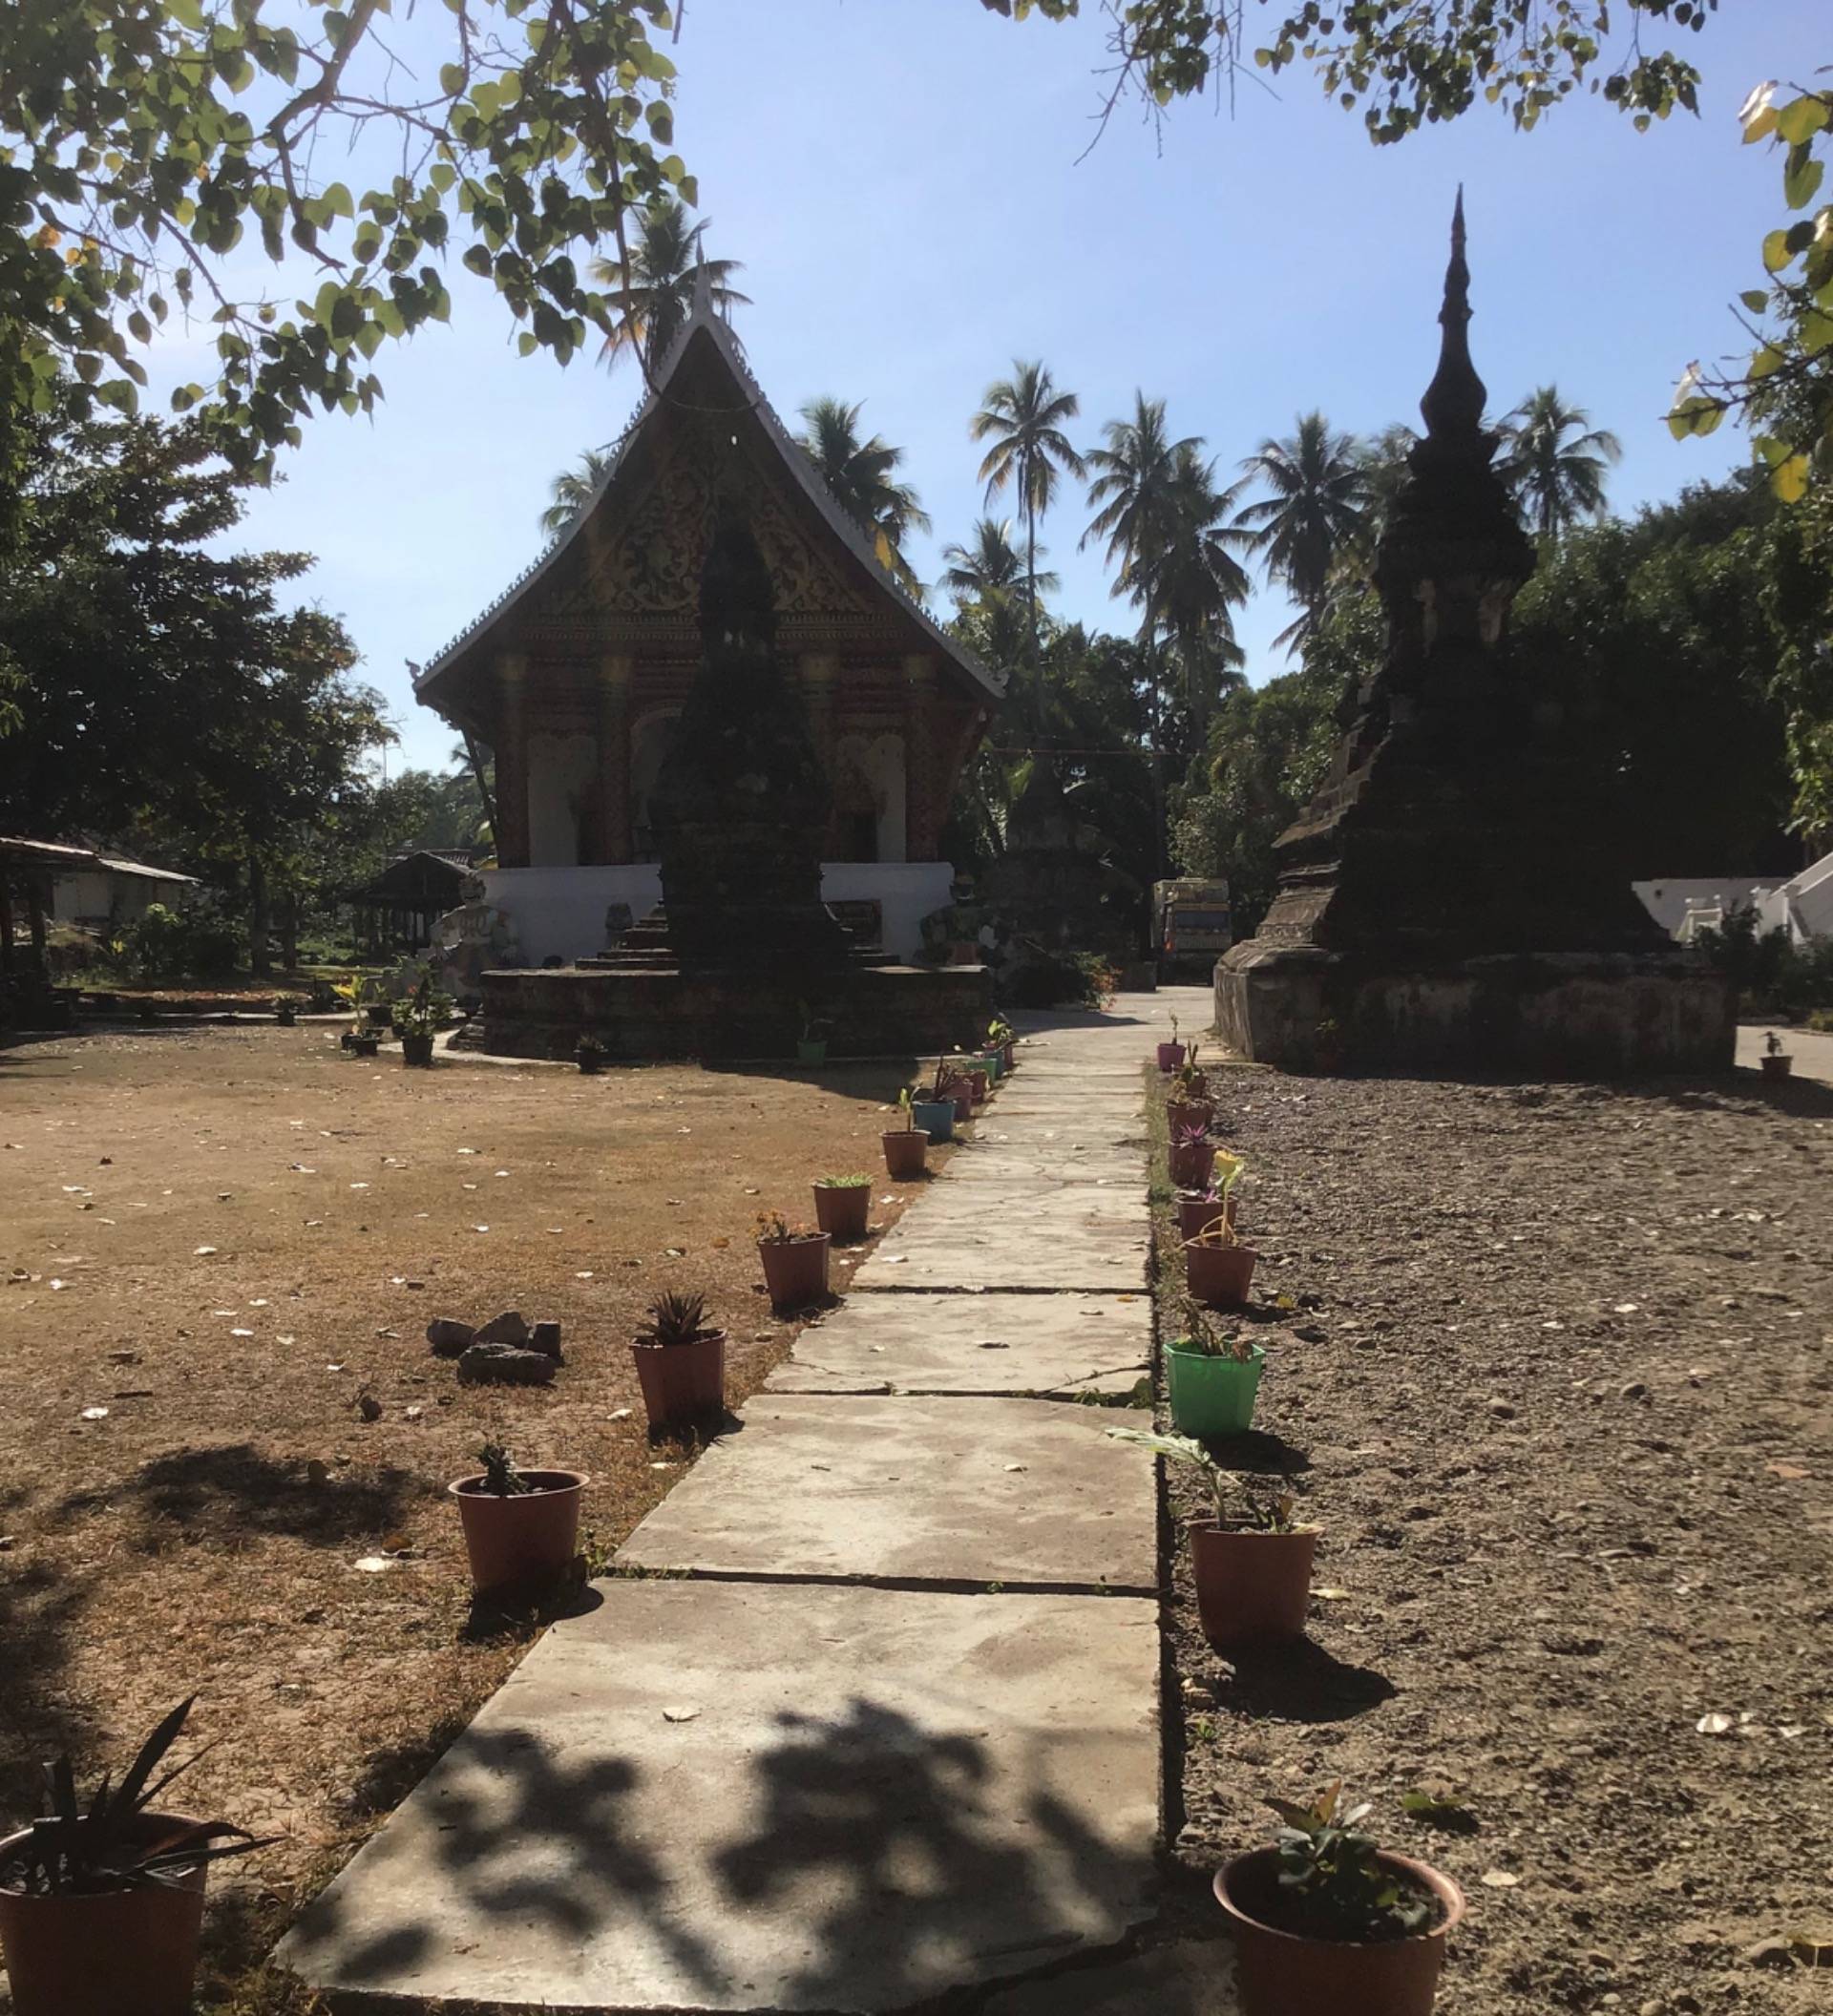 AHAM: The Oldest Temple in Luang Prabang, LAOS